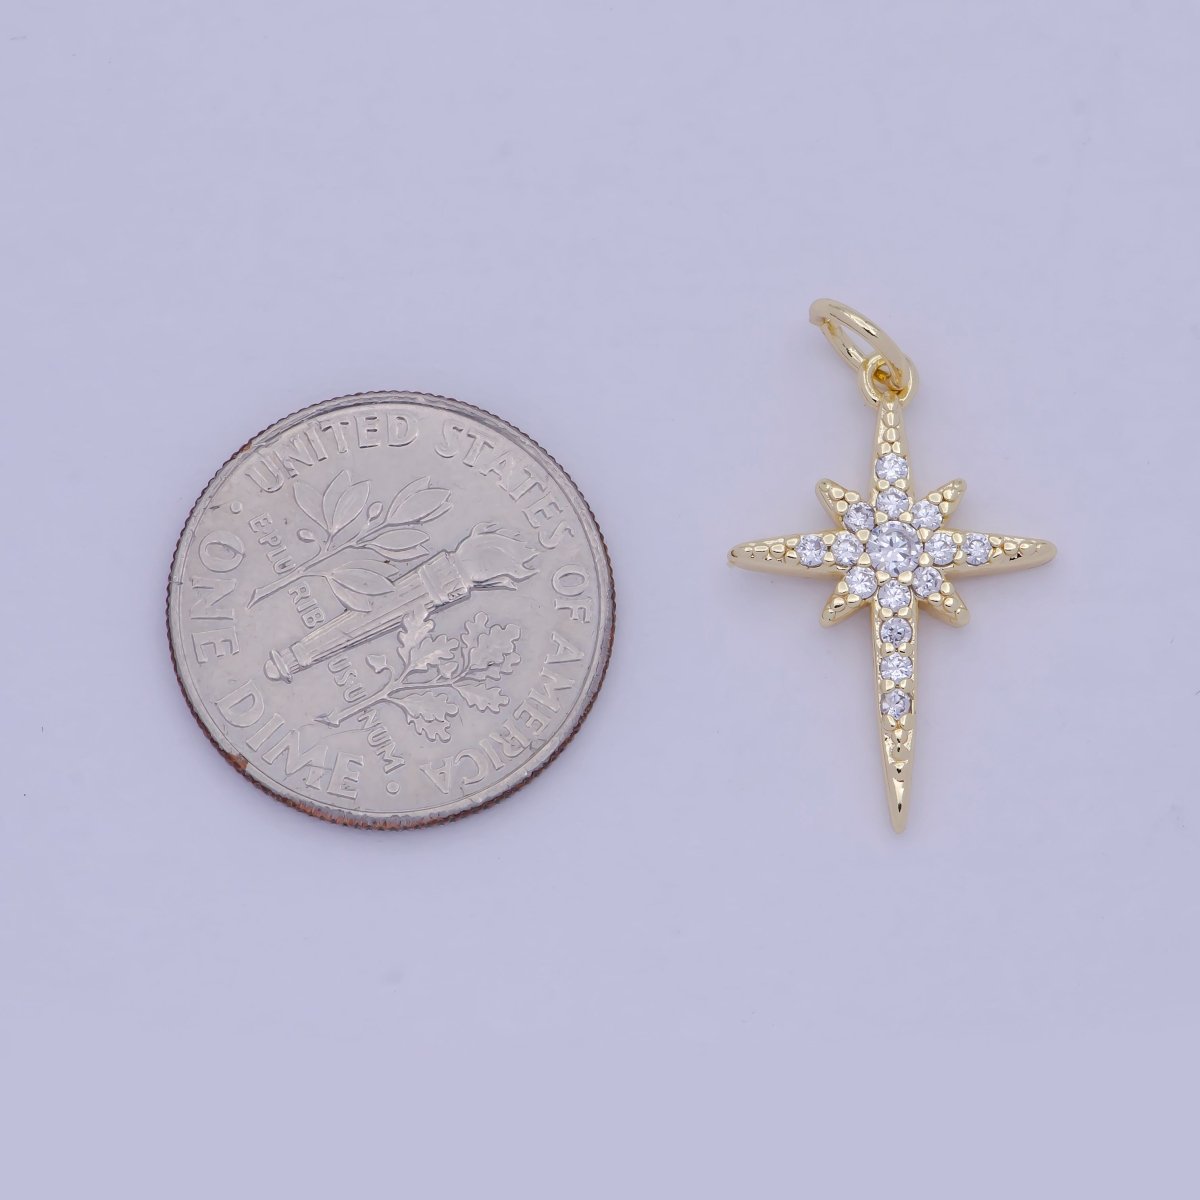 OS DEL-Dainty North Star Charm Cubic Star Pendant for Celestial Jewelry E-777 - DLUXCA